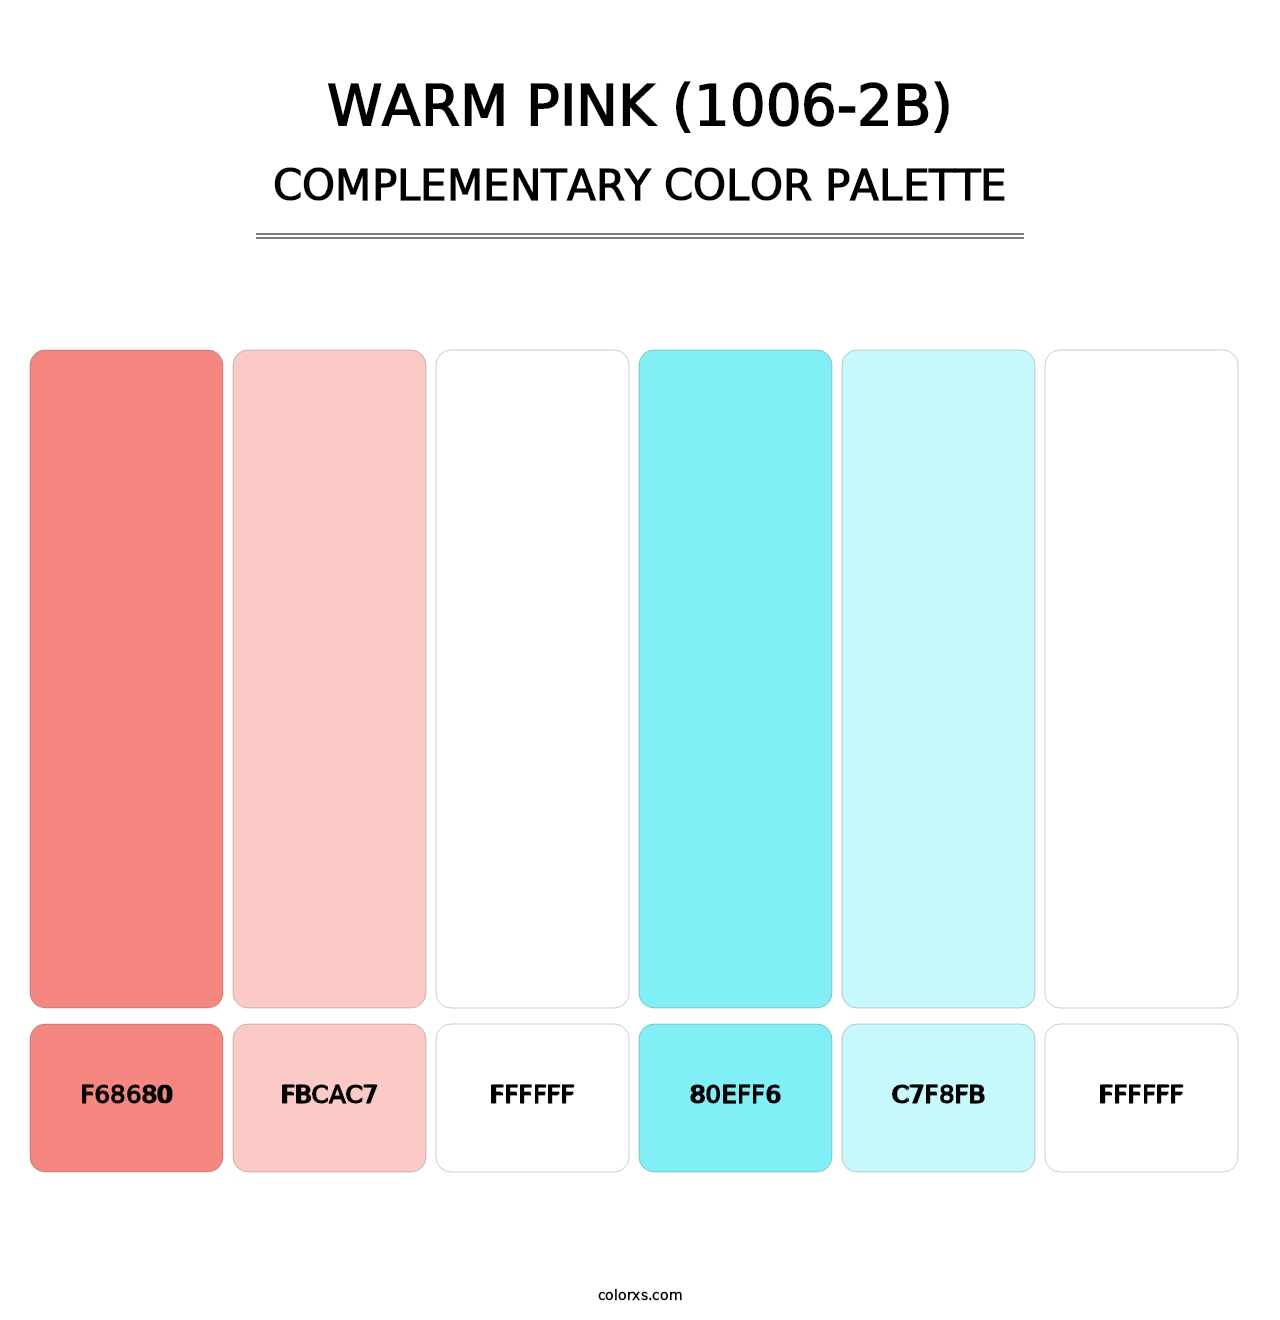 Warm Pink (1006-2B) - Complementary Color Palette